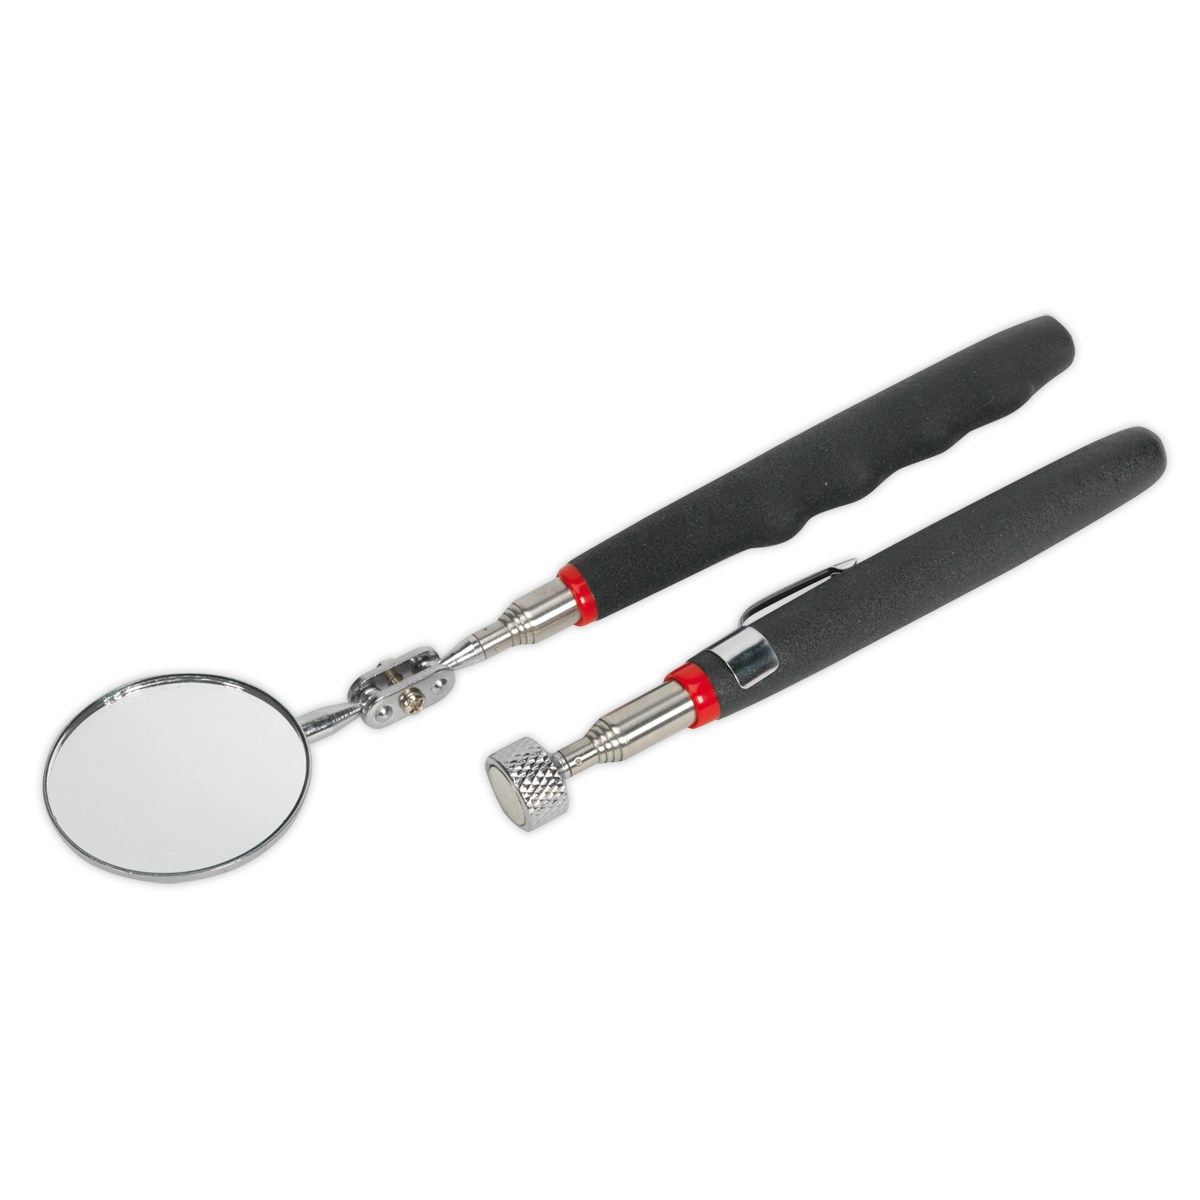 Telescopic Magnetic Pick-Up Tool & Inspection Mirror Set 2pc - S0940 - Farming Parts